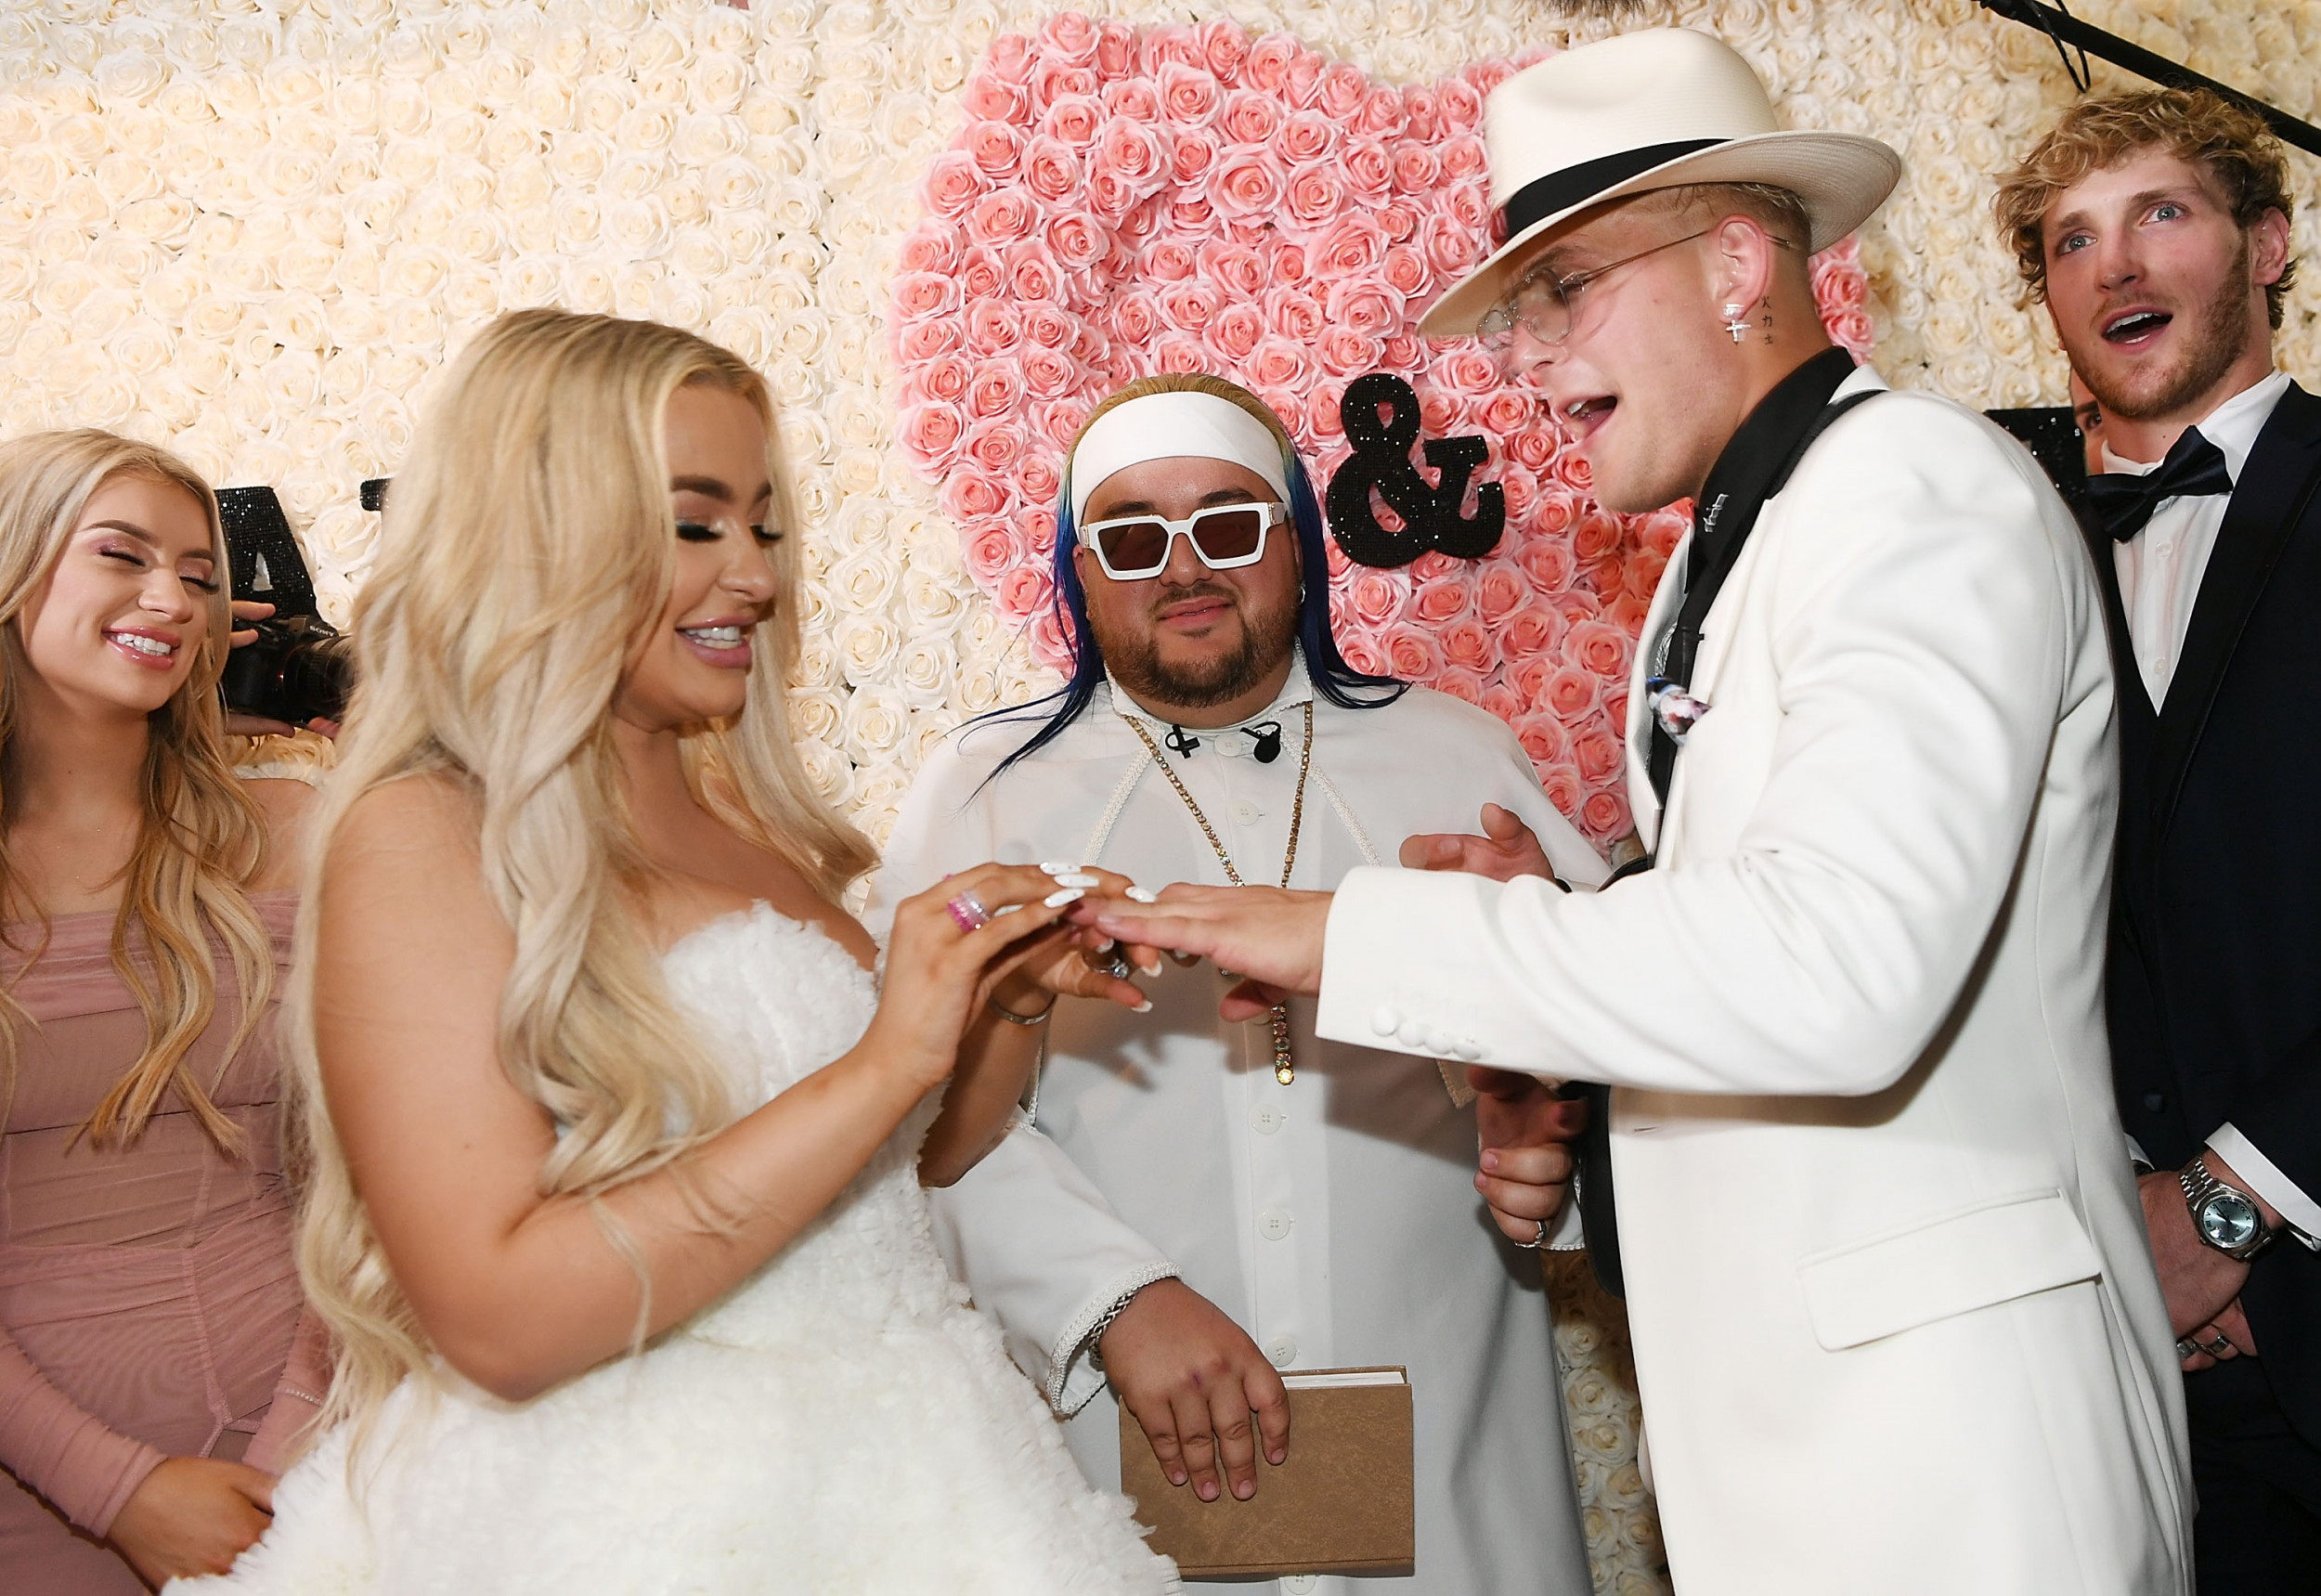 Is Tana Mongeaus Marriage to Jake Paul Real? What The YouTube Stars Are Saying